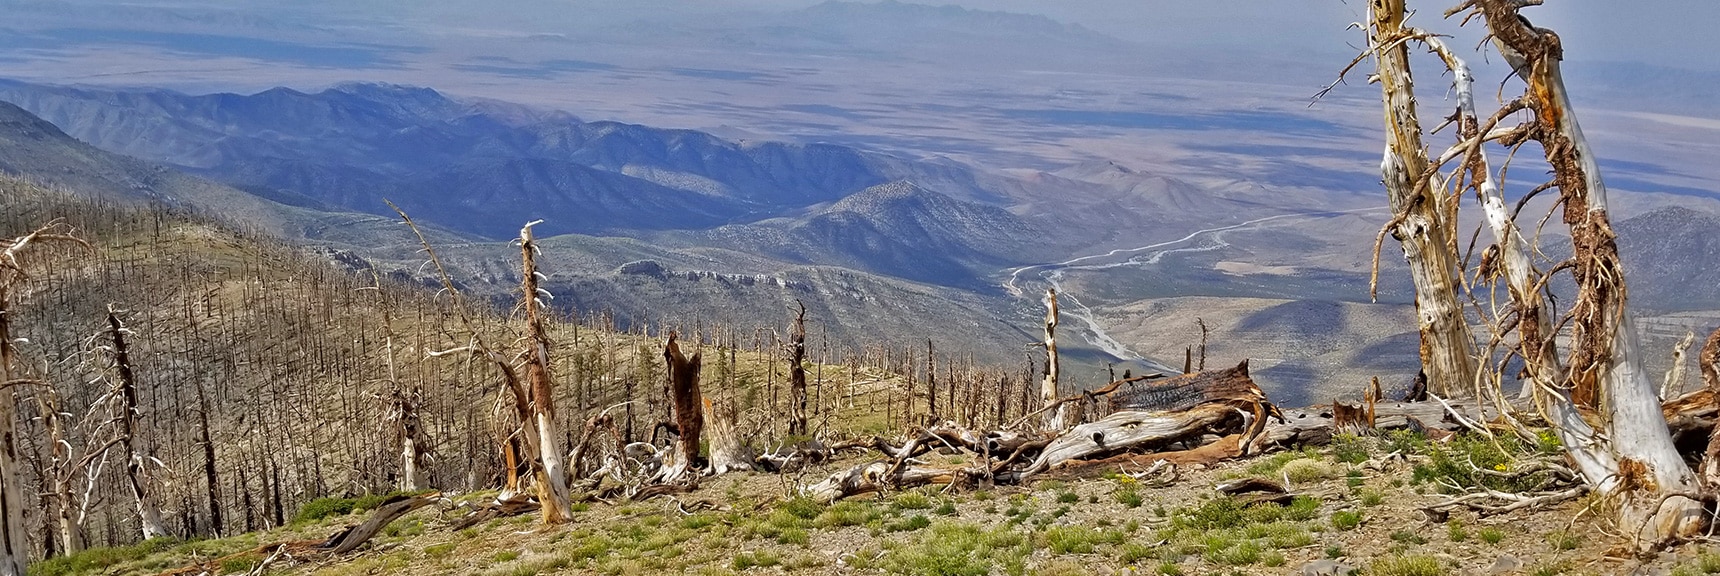 Another View Down Trout Canyon. Burned Out Trees and Patches of Grass on the Ridge | Sexton Ridge Descent from Griffith Peak, Mt. Charleston Wilderness, Spring Mountains, Nevada